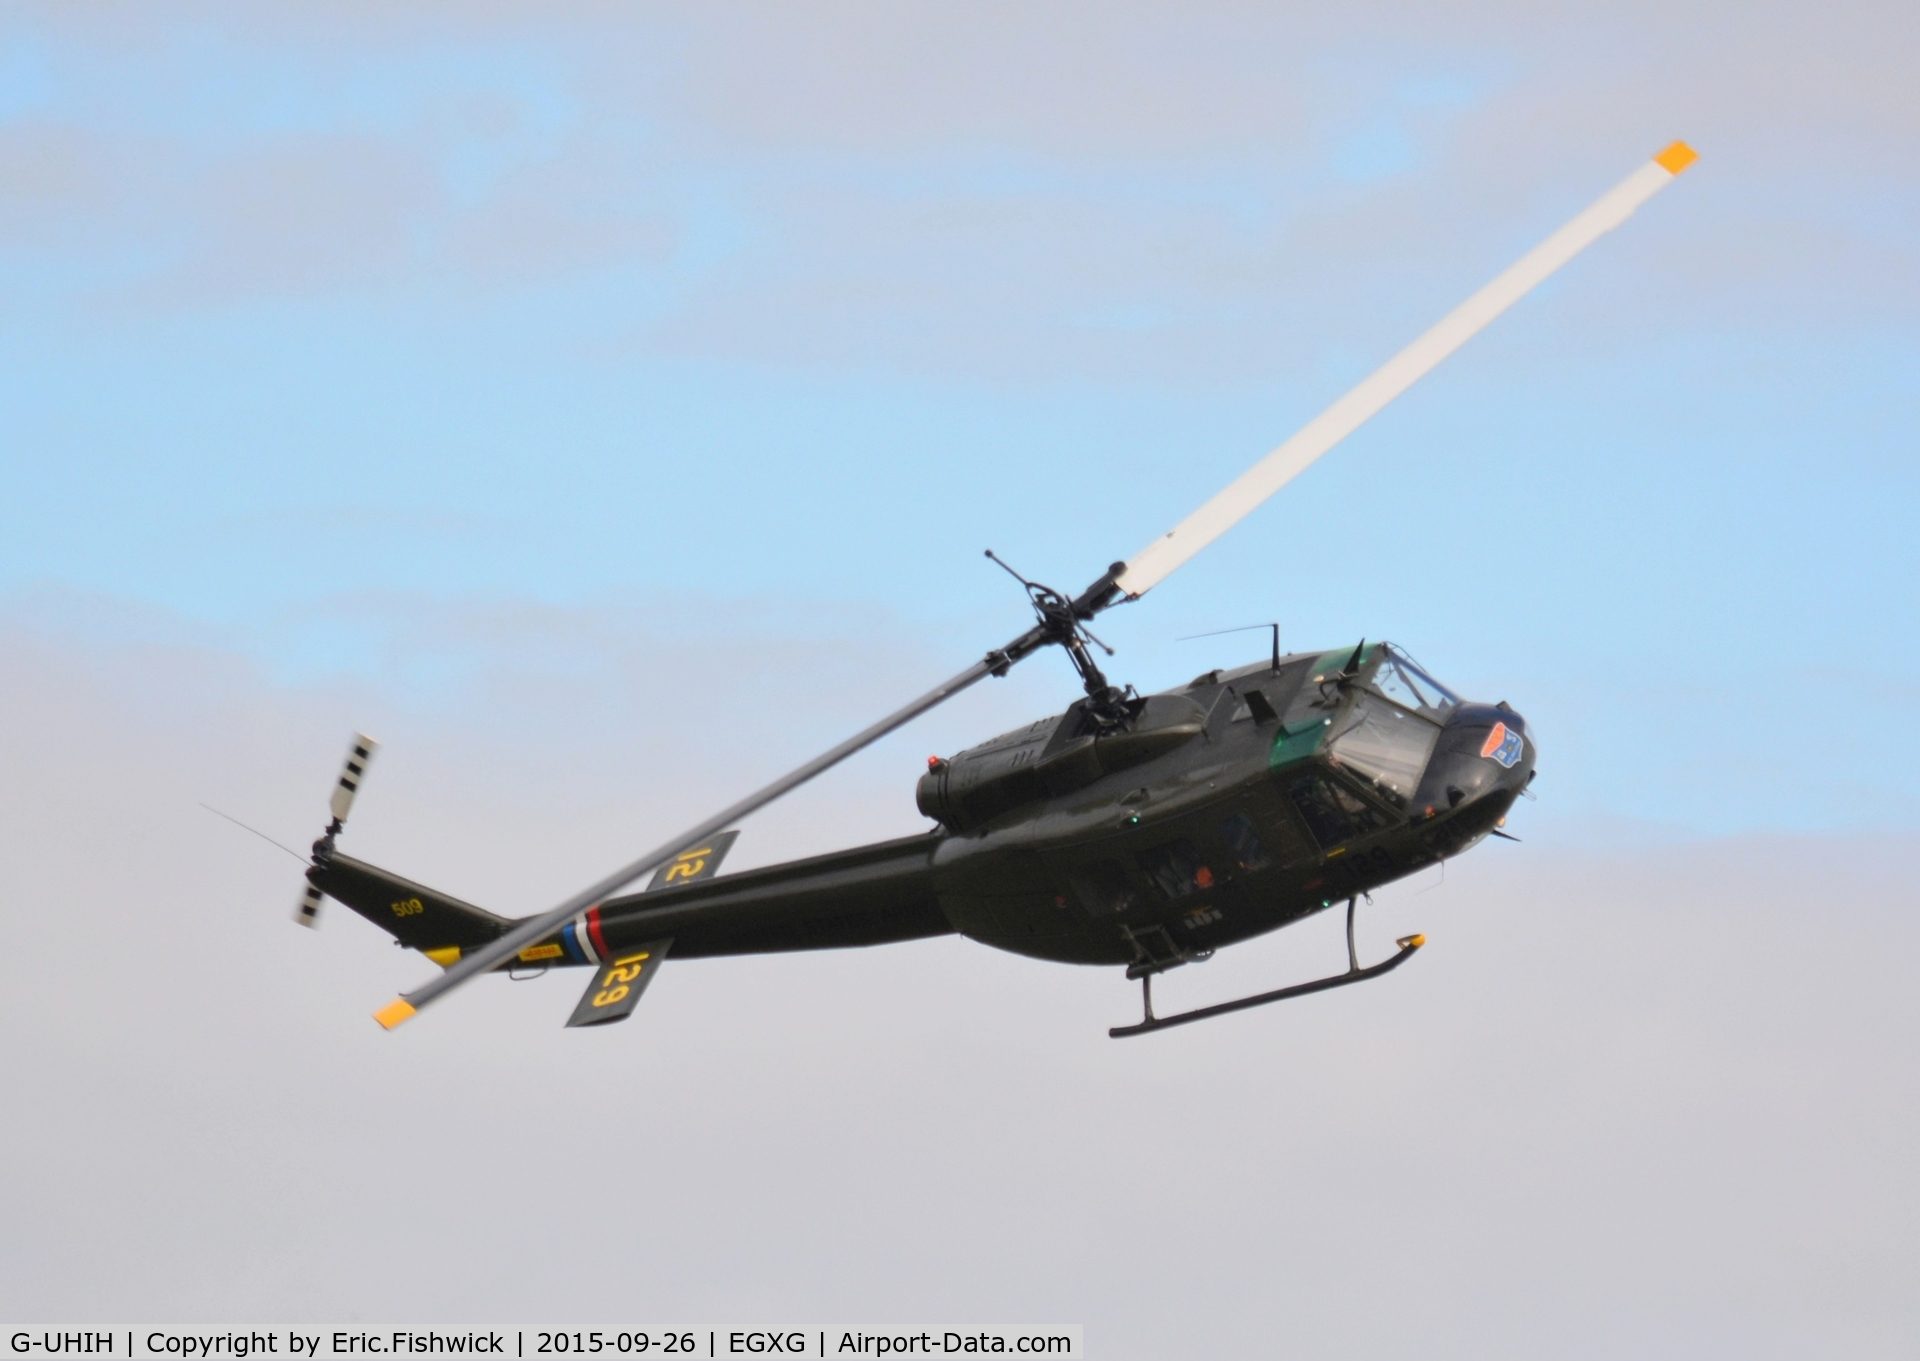 G-UHIH, 1972 Bell UH-1H Iroquois C/N 13208, 42. G-UHIH at The Yorkshire Air Show, Church Fenton, Sept. 2015.